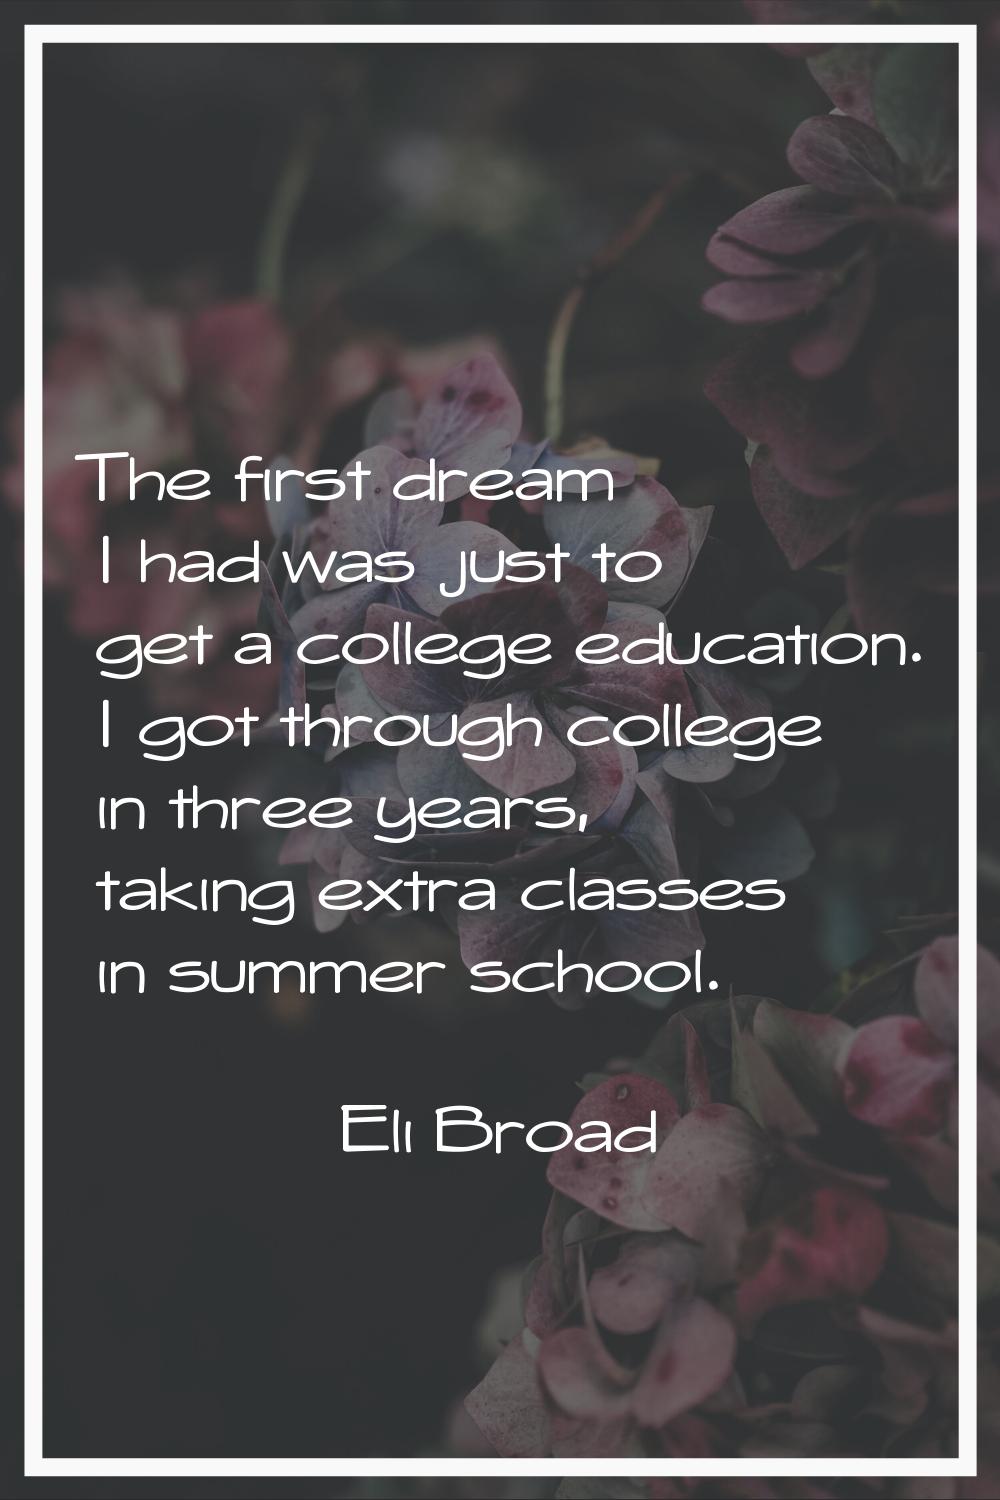 The first dream I had was just to get a college education. I got through college in three years, ta